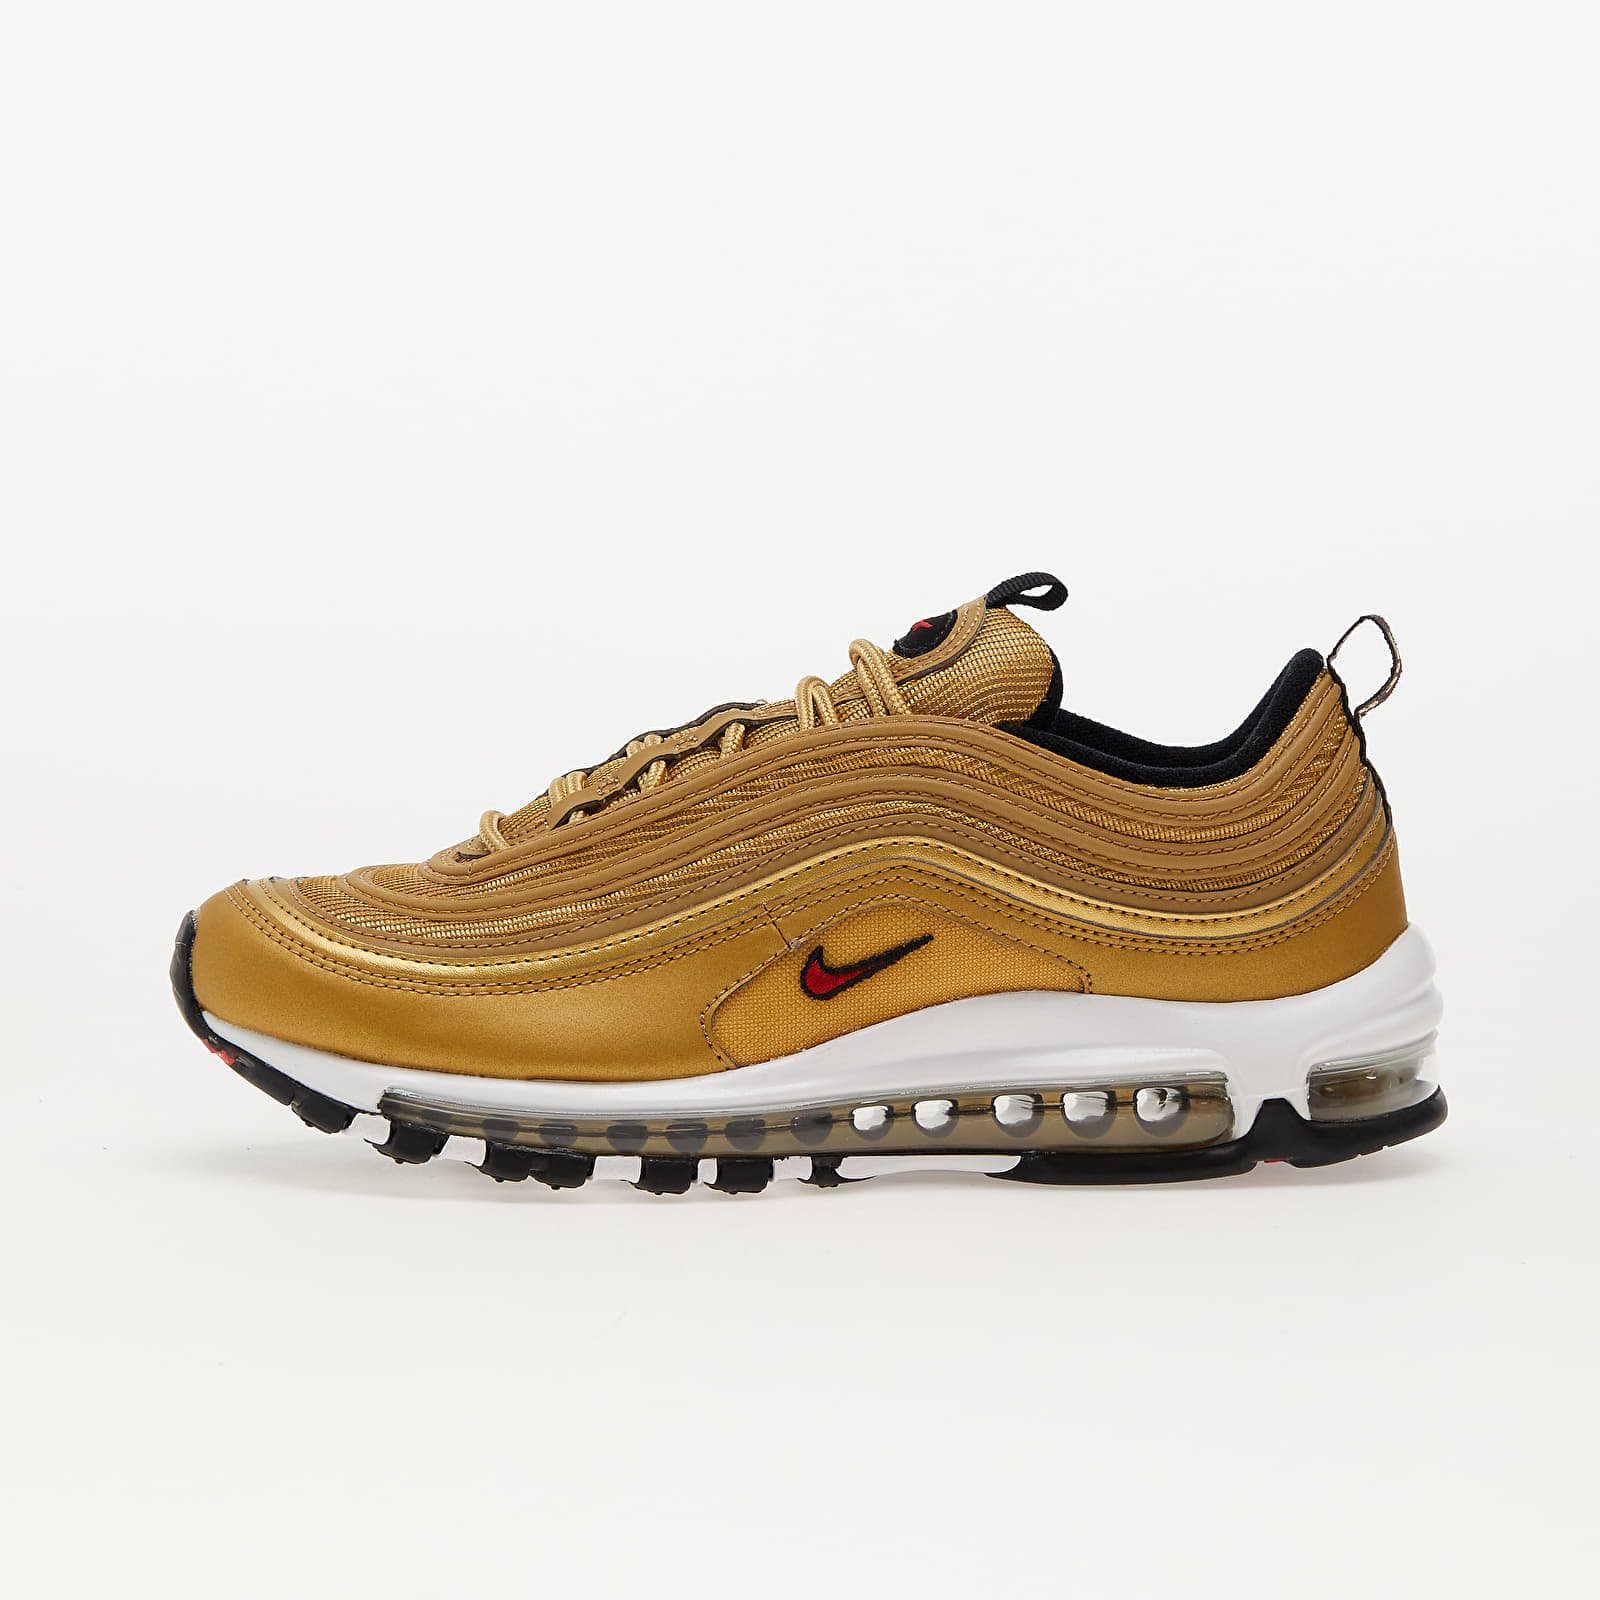 Men's sneakers and shoes Nike Air Max 97 OG Metallic Gold/ Varsity Red-Black-White